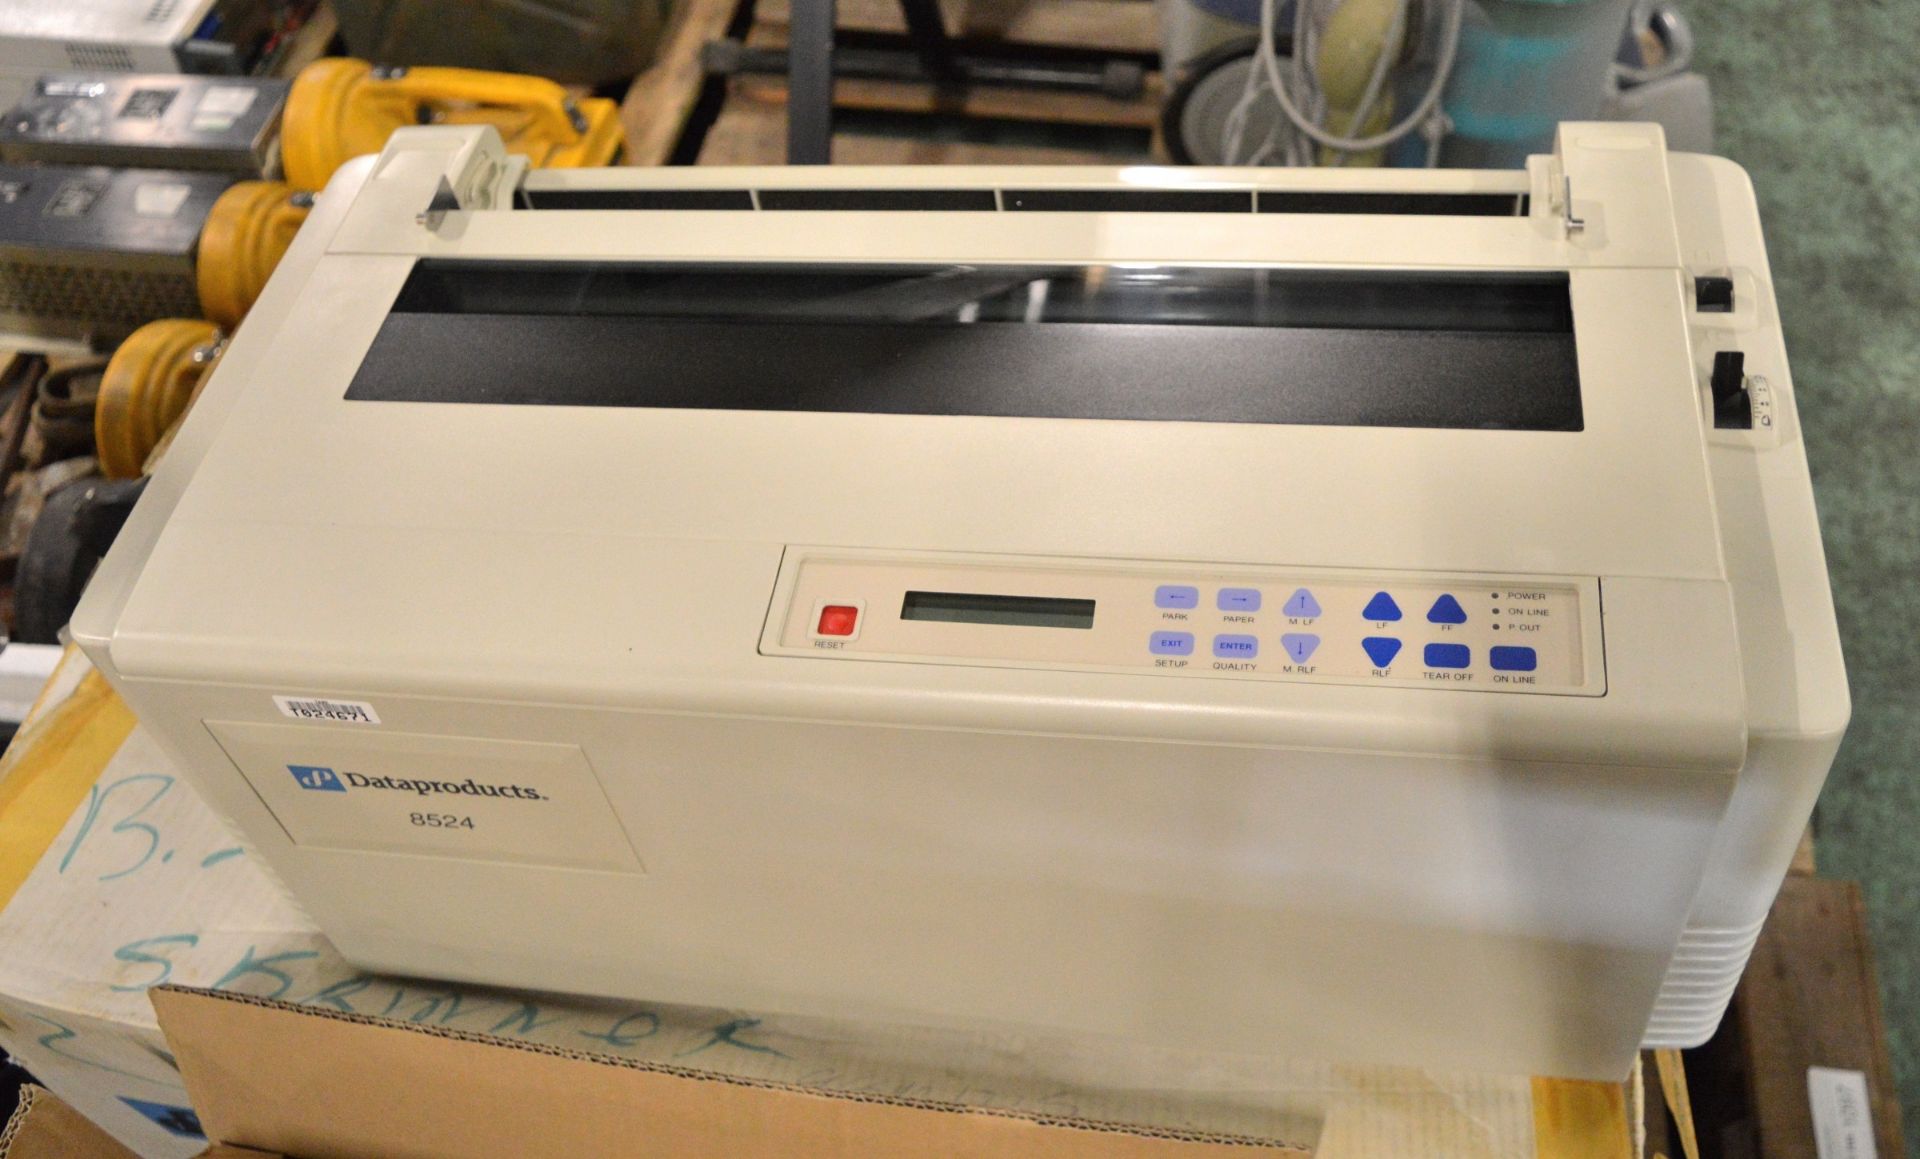 Data Products 8524 printer